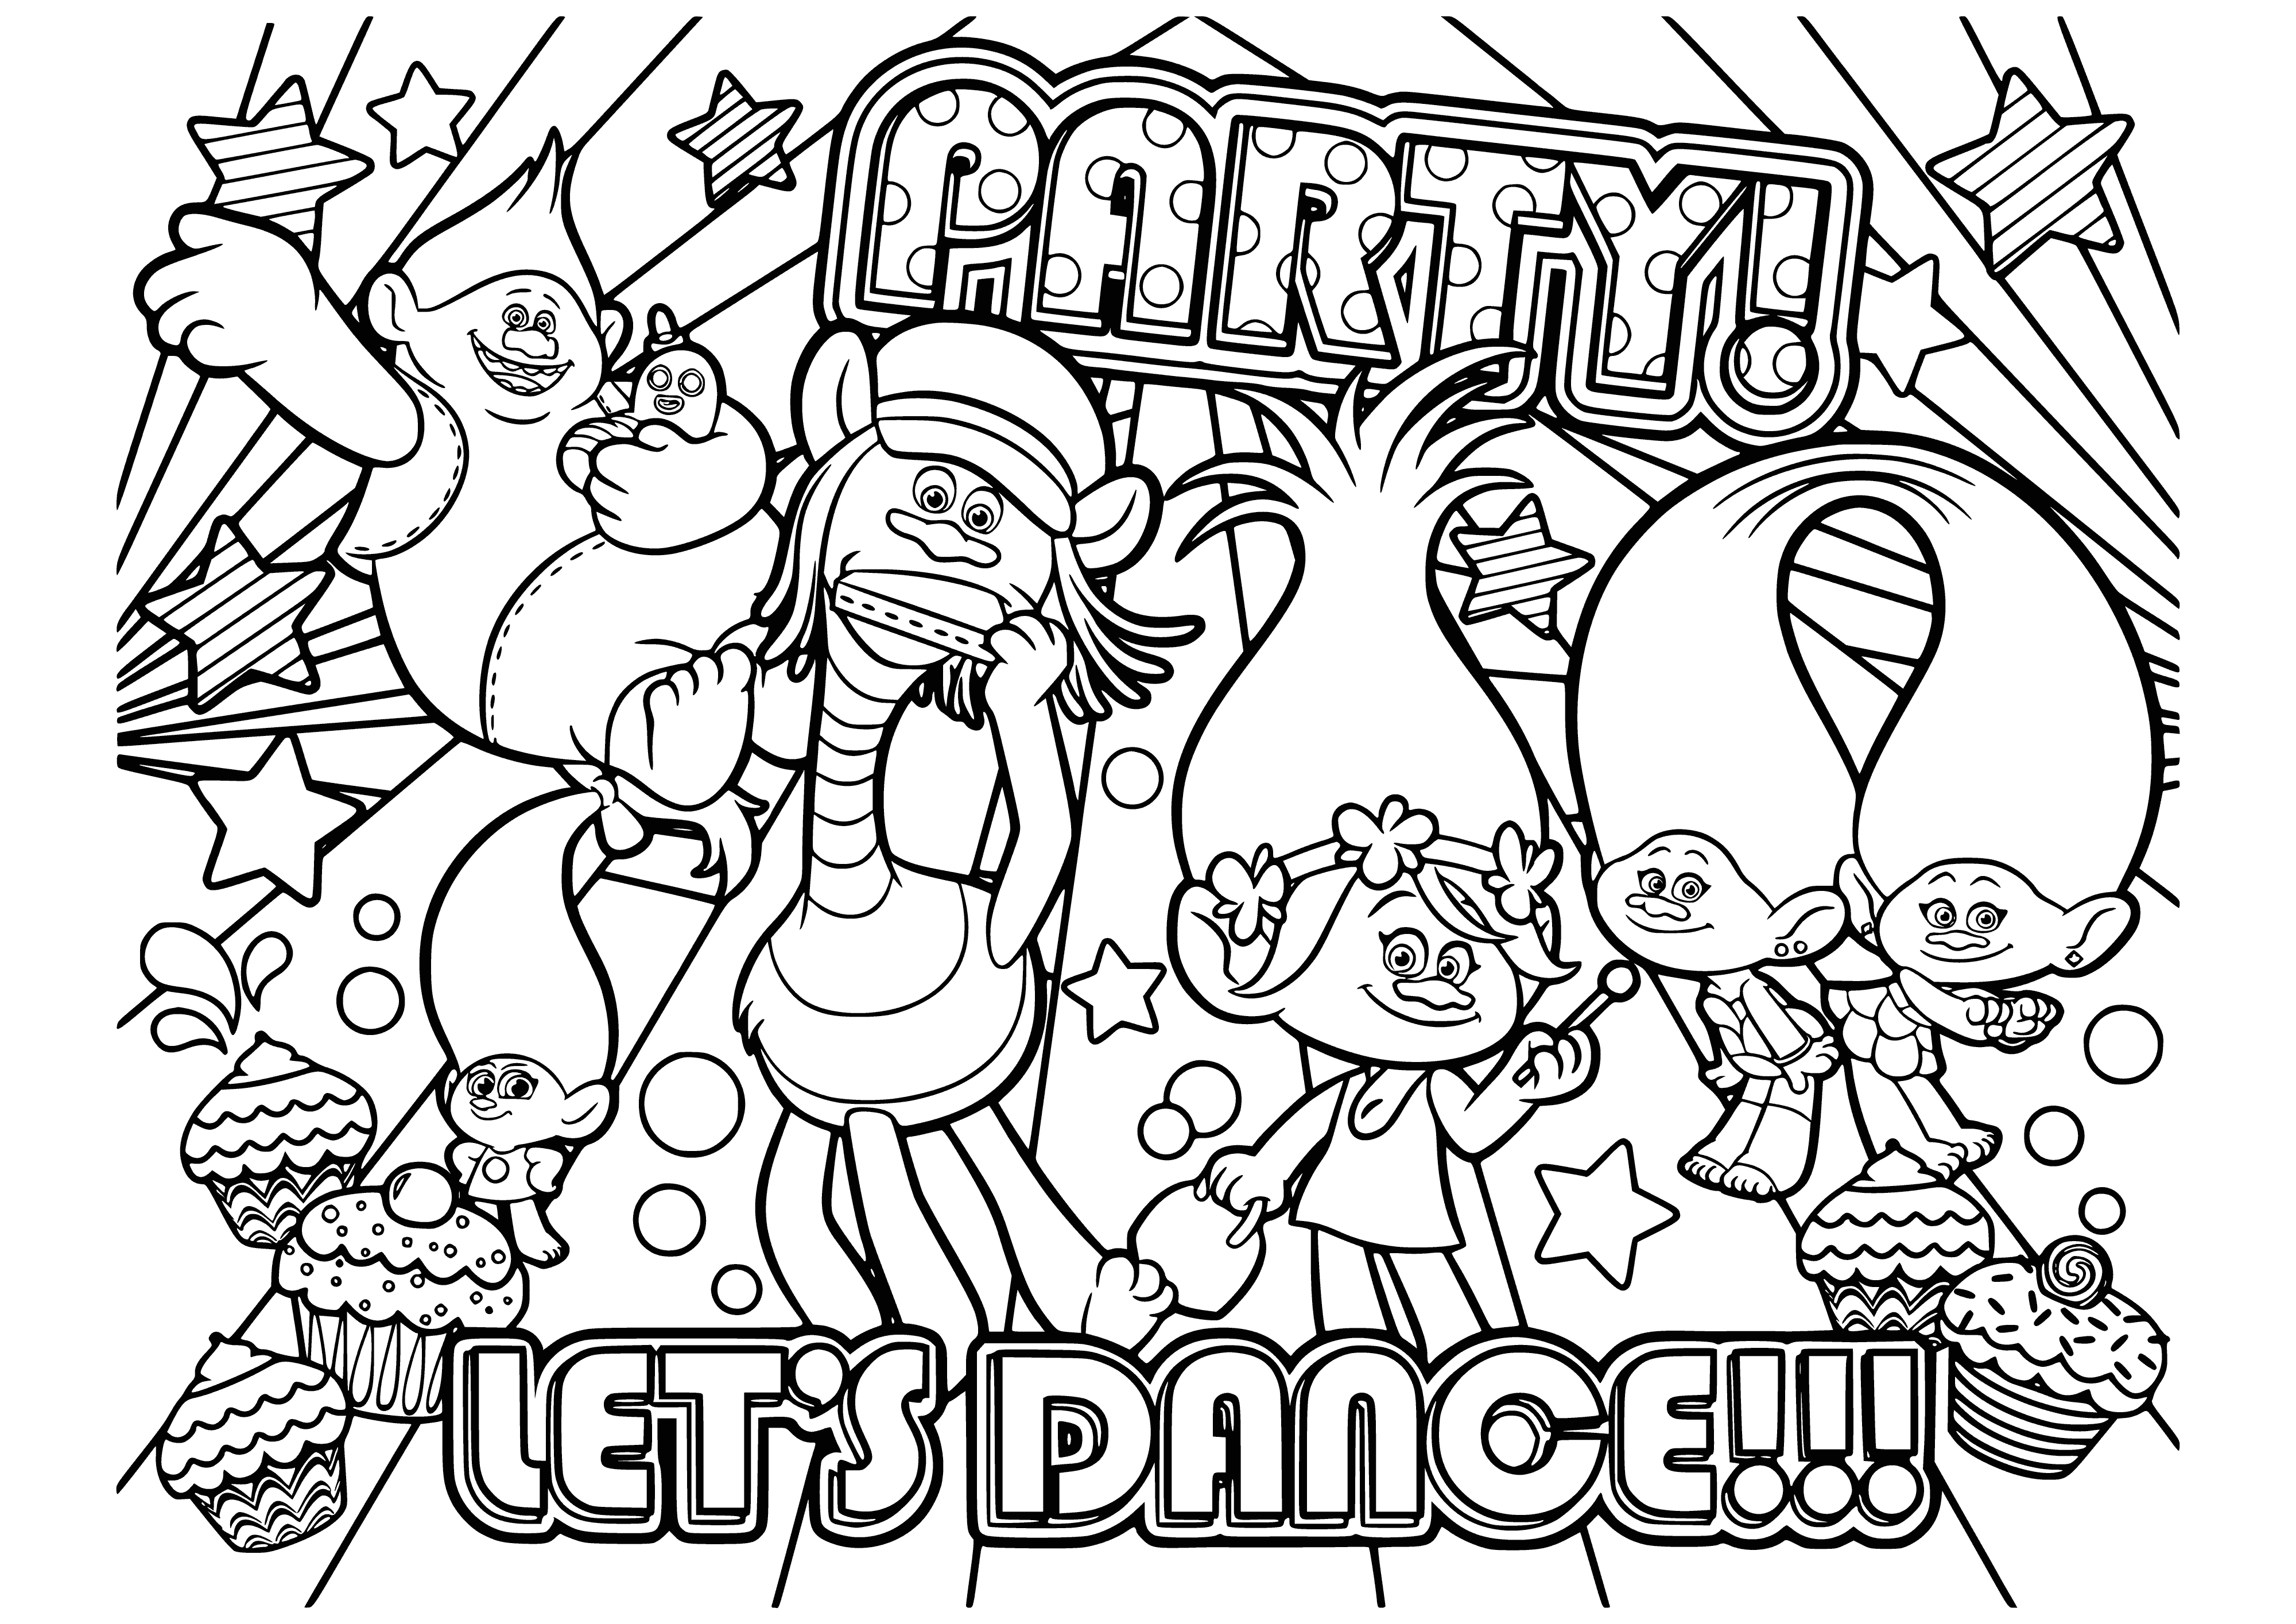 coloring page: Trolls having a party, dancing, laughing, with a large cake, colorful streamers and balloons, and confetti on the floor. A fun time is had by all!